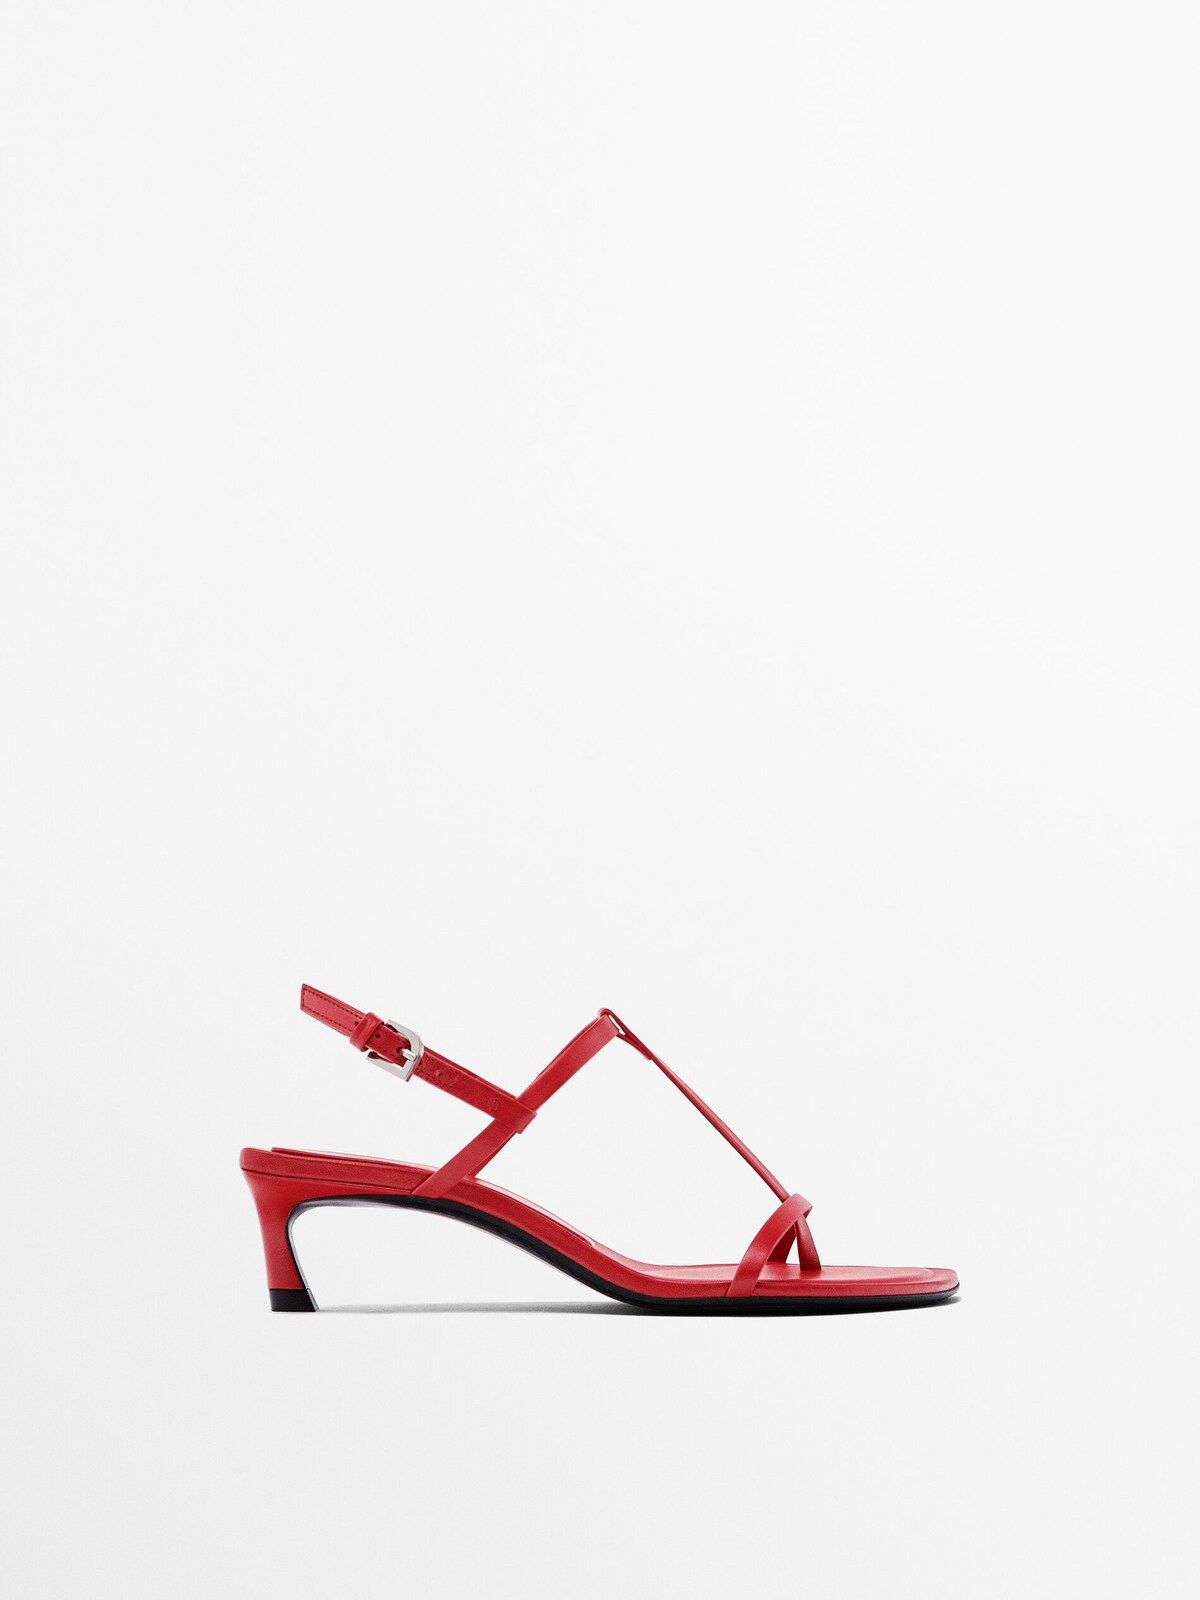 Red heeled sandals - Limited Edition | Massimo Dutti (US)